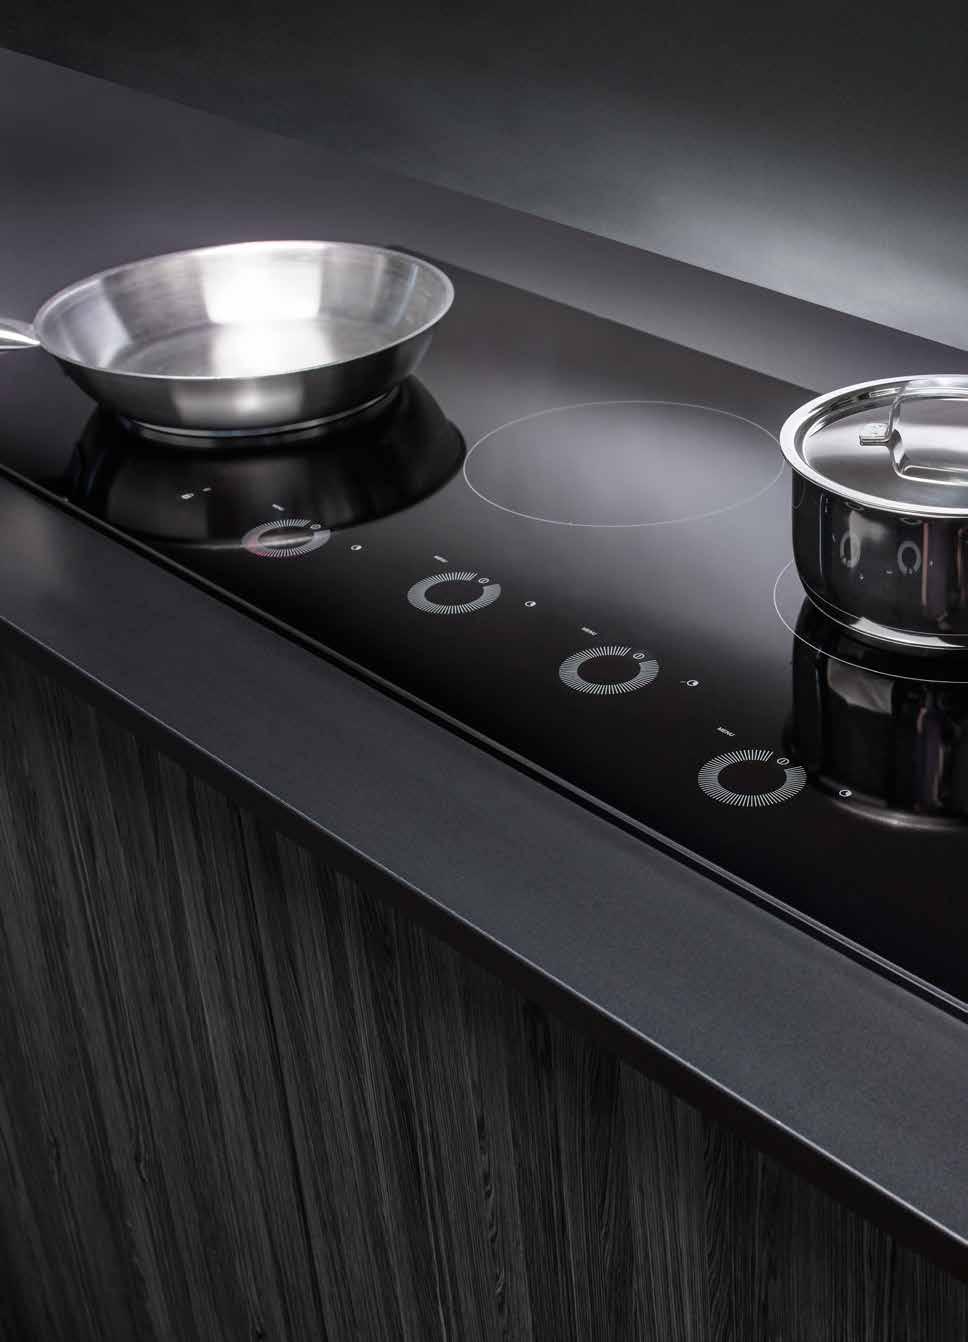 It will change the way you cook. Positively Gas or induction? A difficult choice for many cooking enthusiasts.